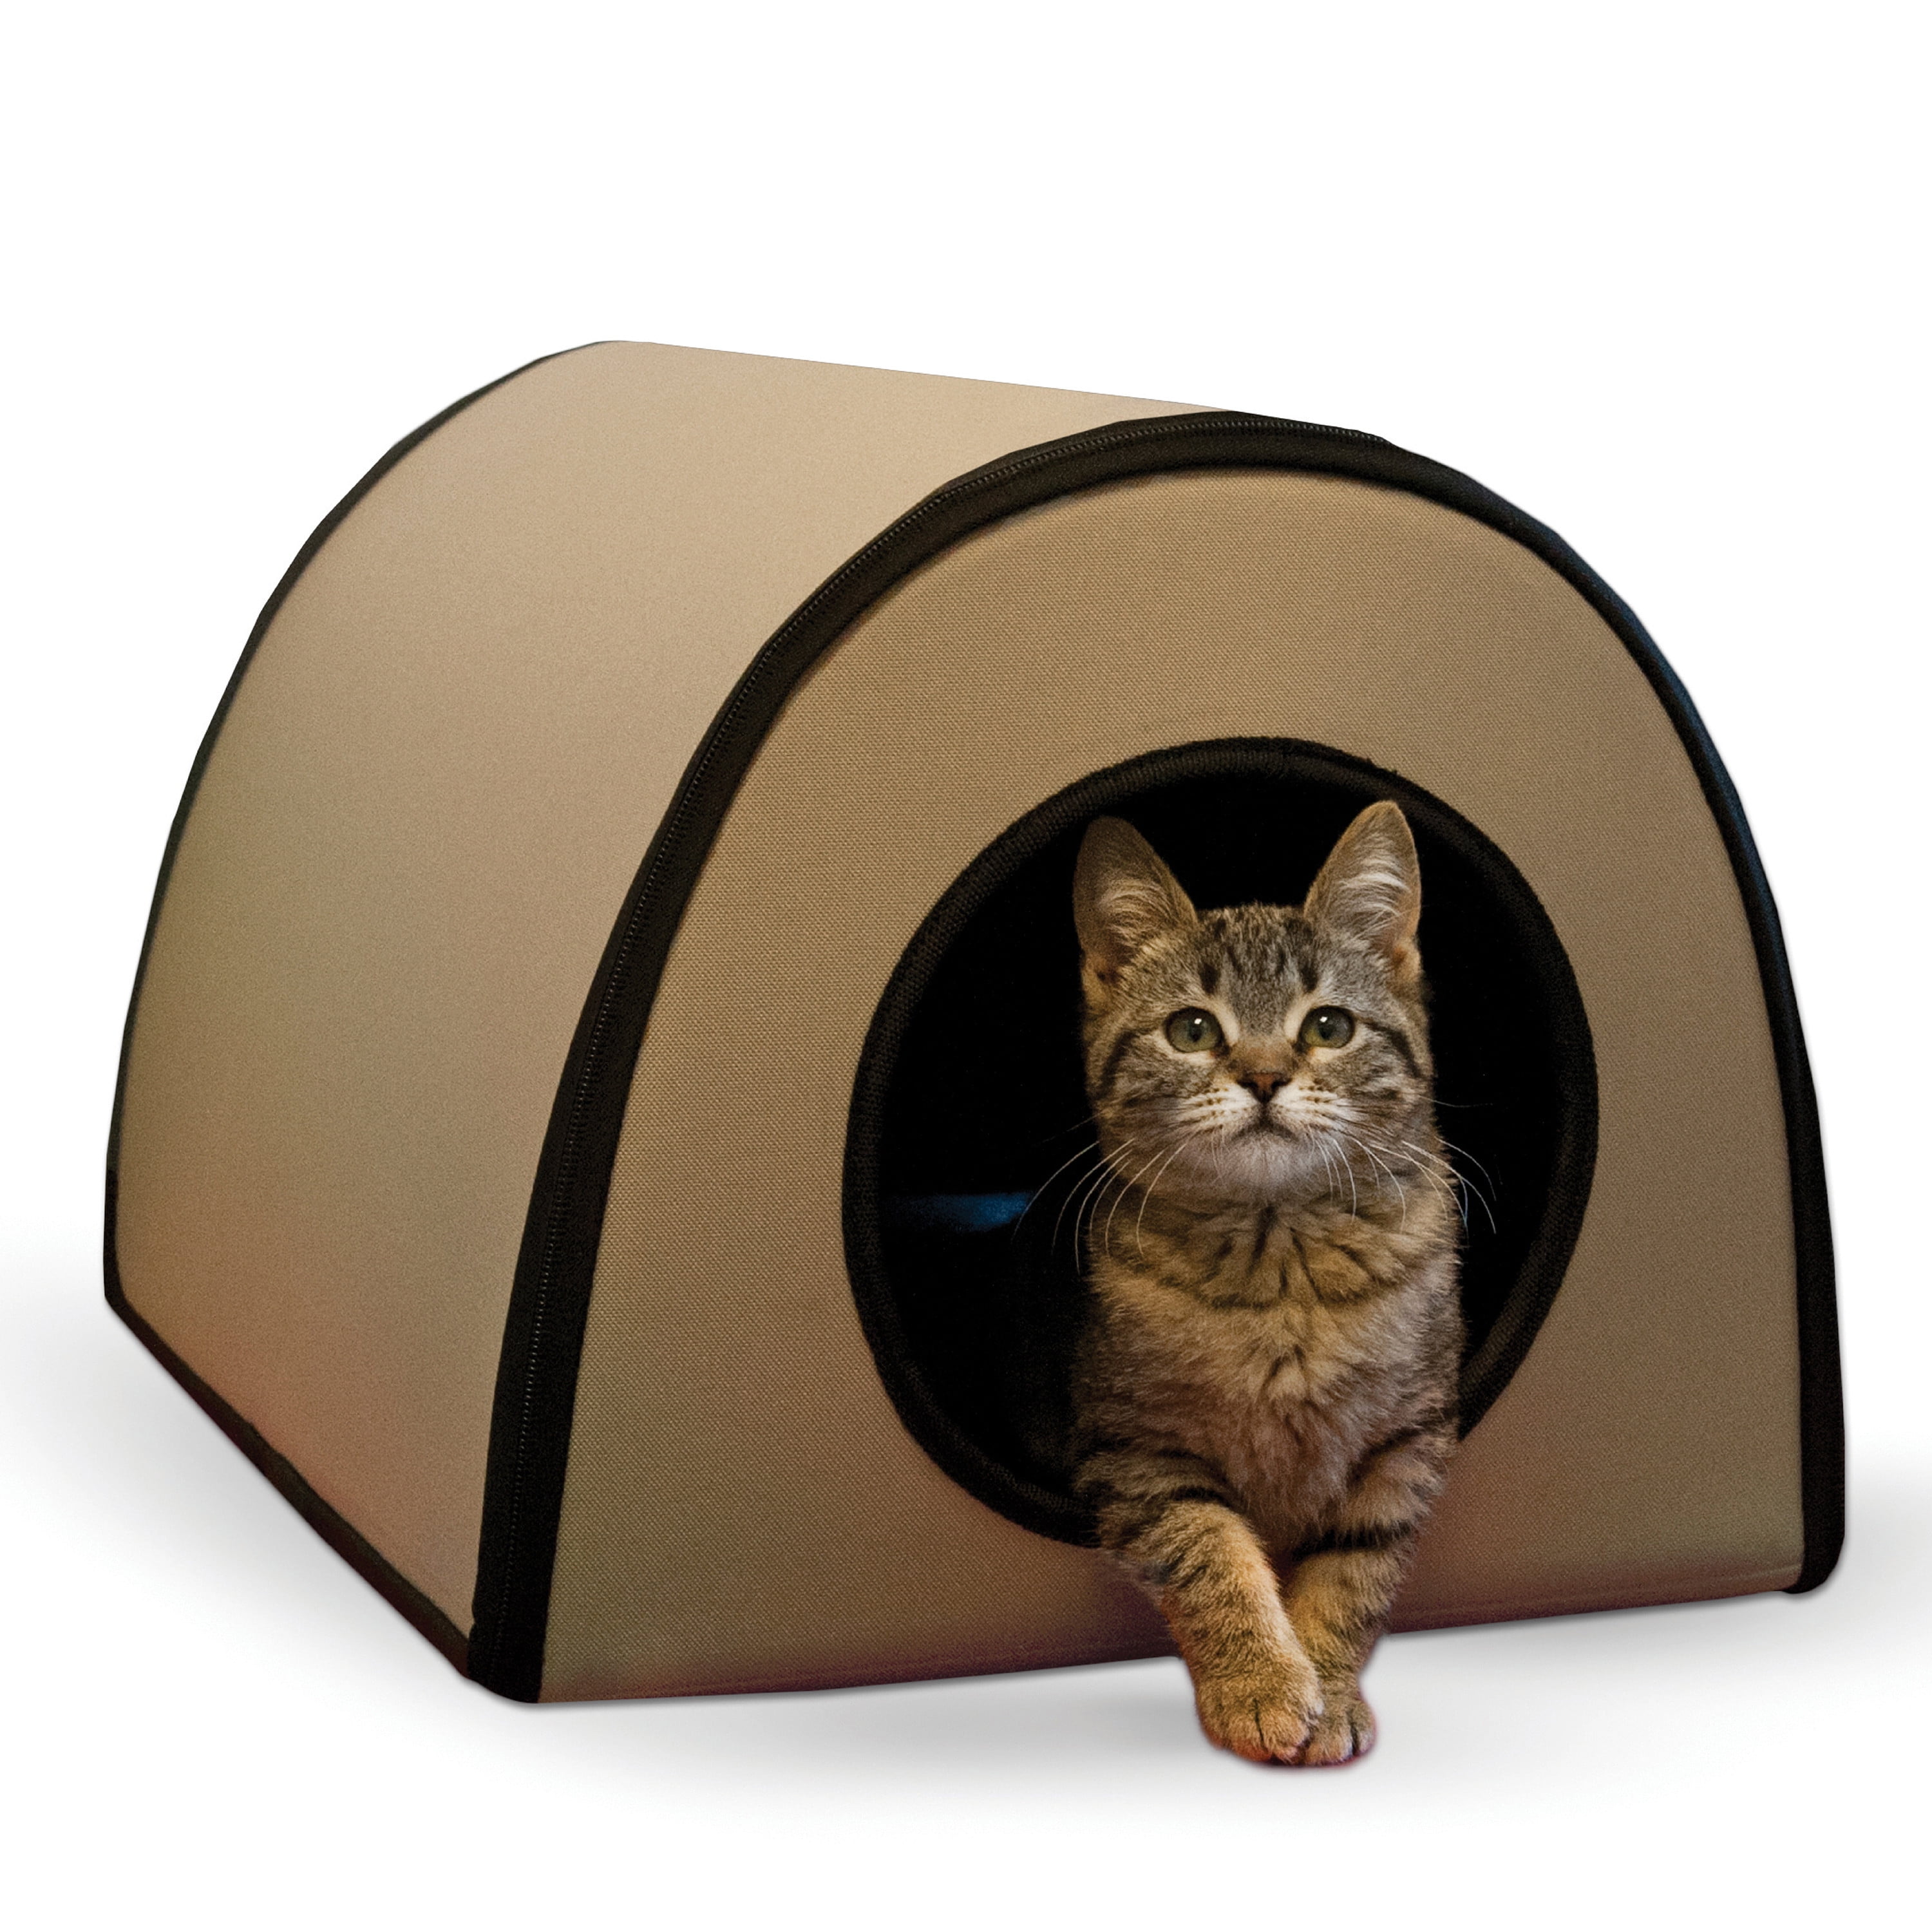 Thickened Outdoor Pet House Waterproof Foldable Tent with Sponge Lining Outdoor Kitty House Cat Shelter for Cat Or Small Dog Foldable Cat Cave Bed for Winter kaigeli Cat Dog House 